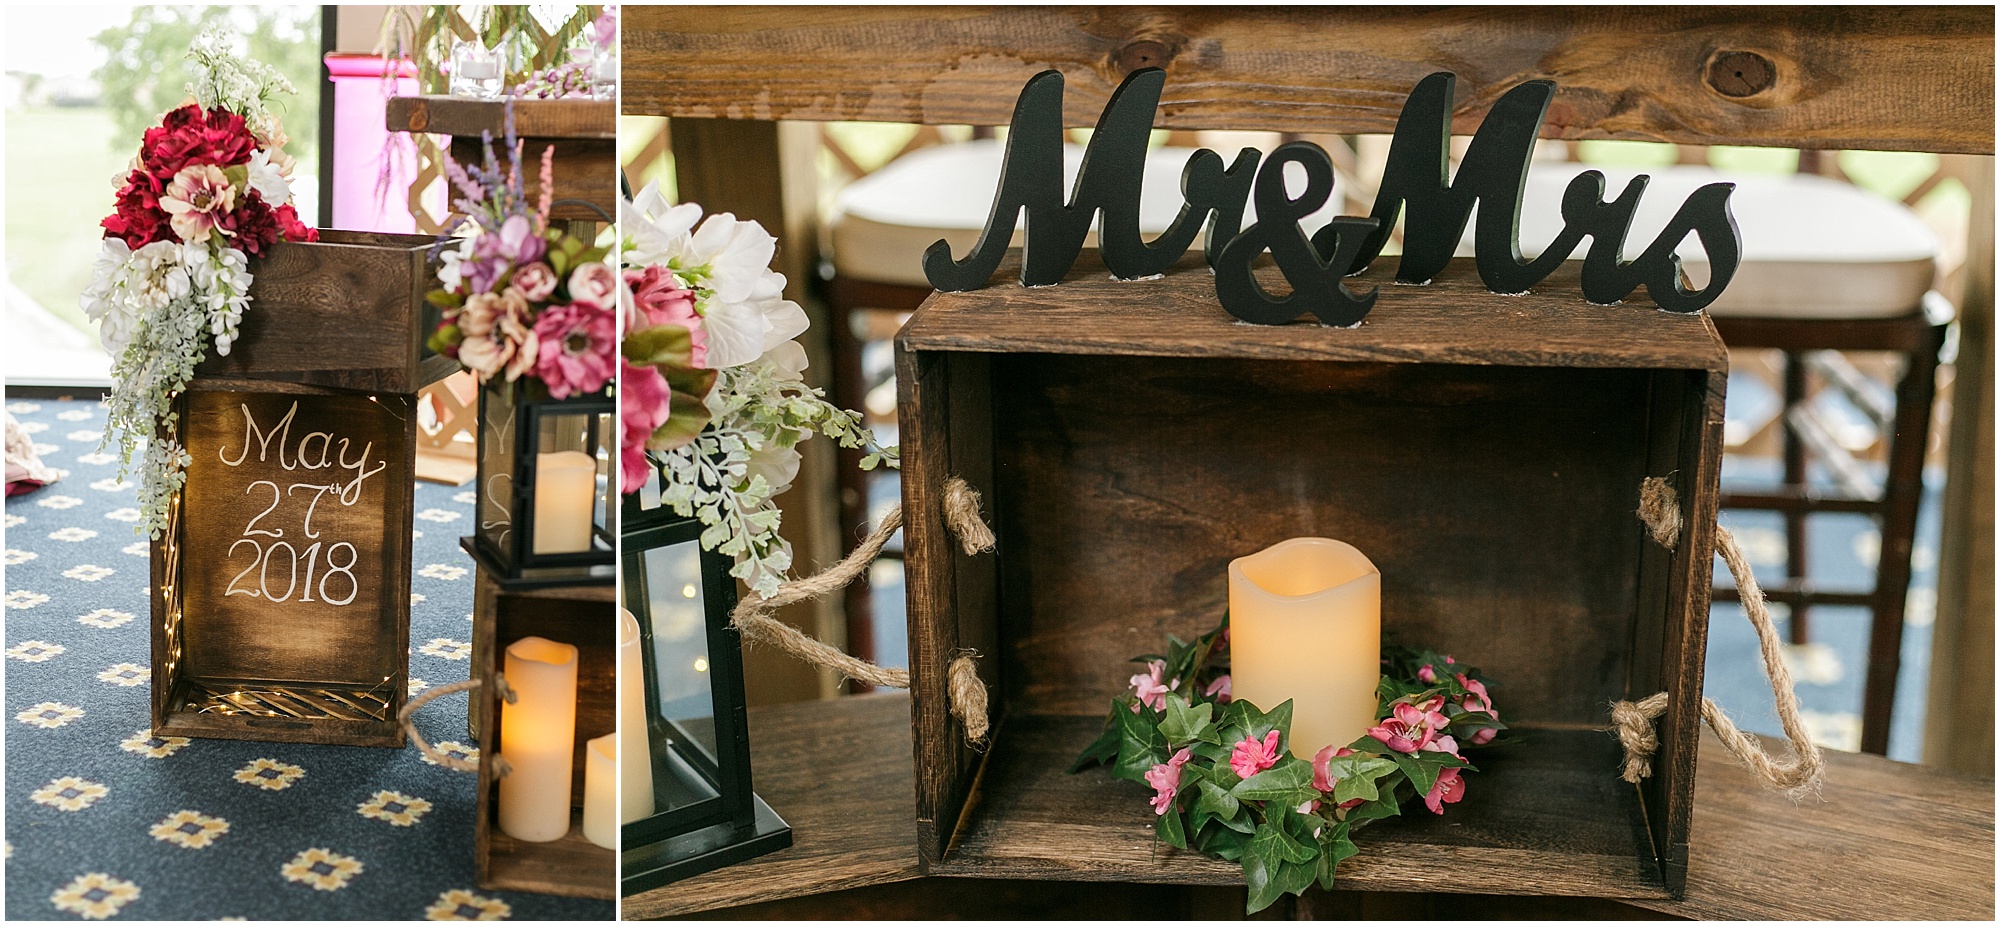 Rustic custom details from their sweetheart table. 